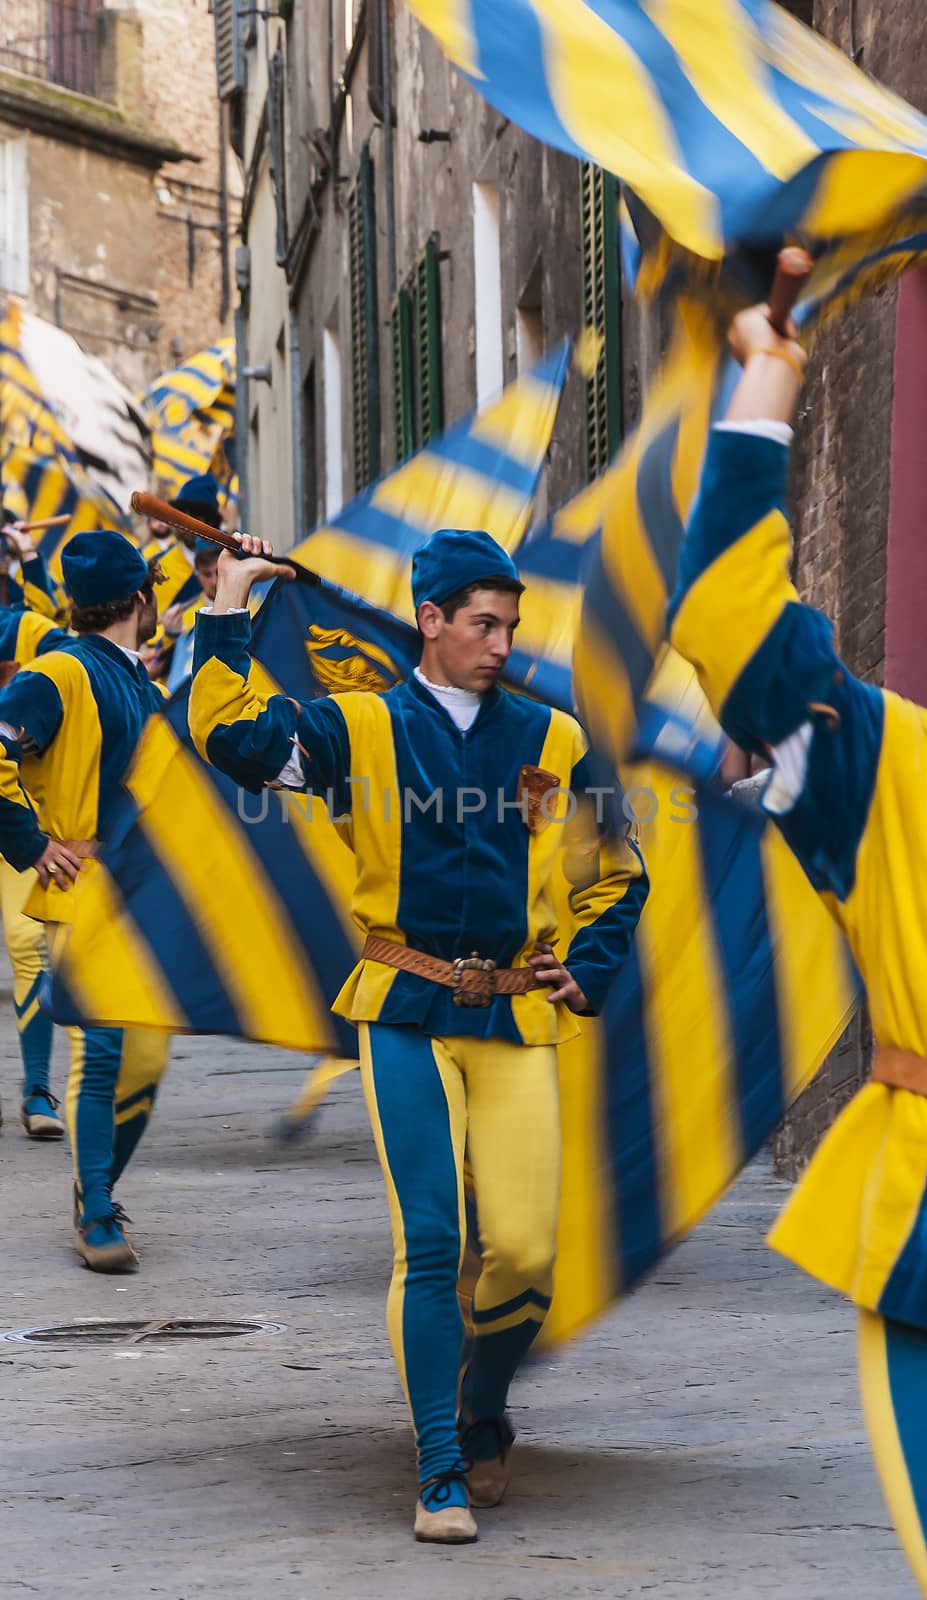 flag-flyers before the Palio in Siena, Italy